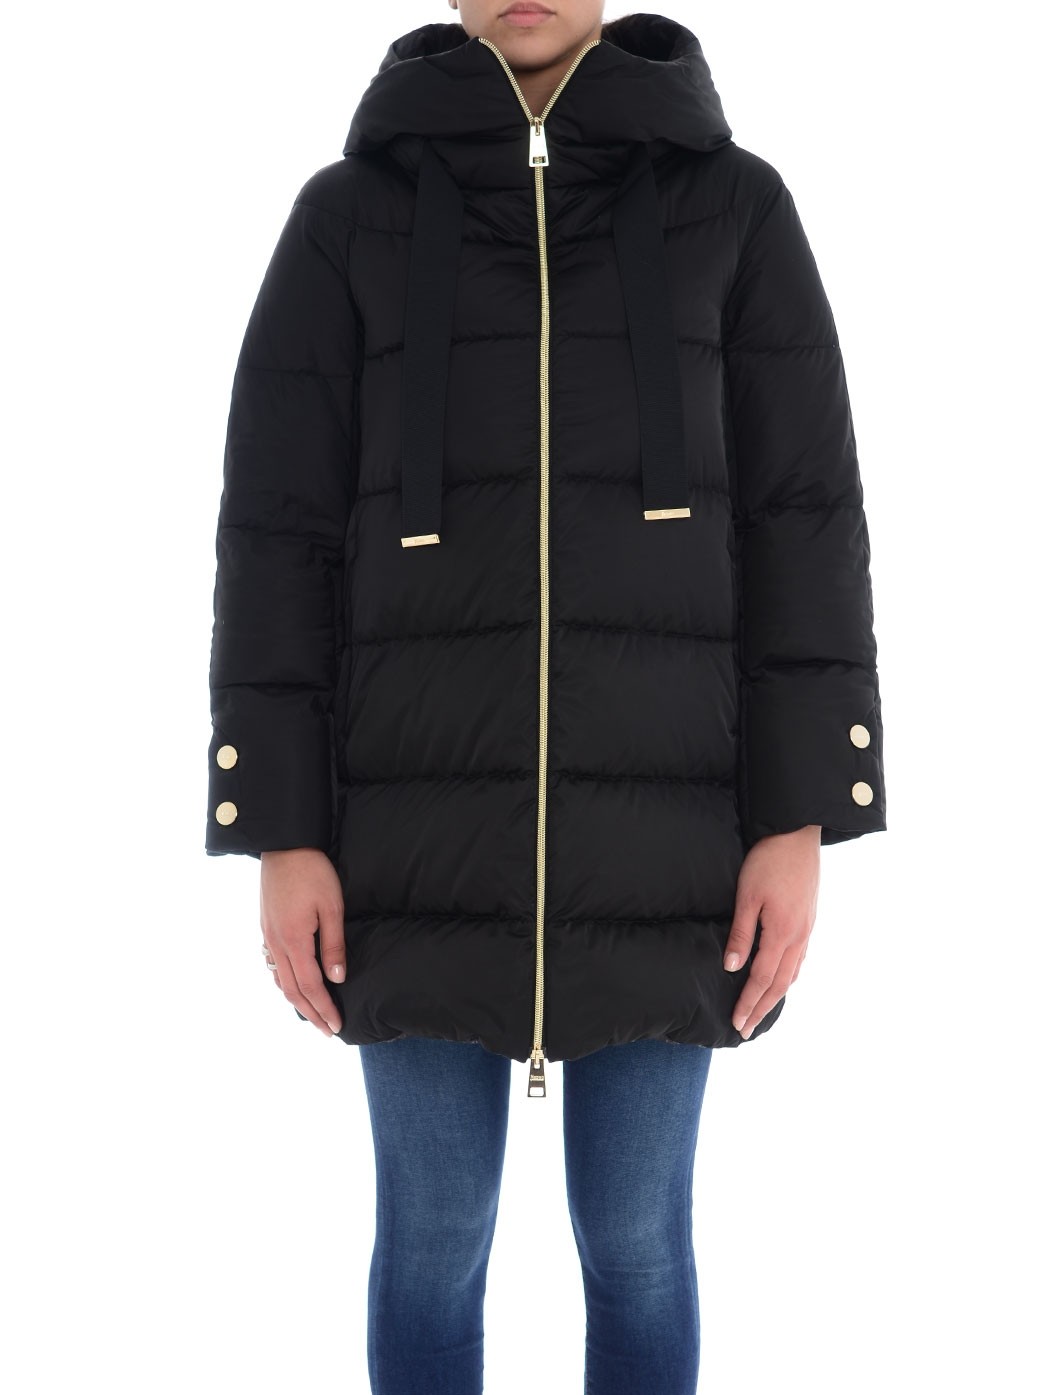  down jackets,removable hoods,WOMEN DOWN JACKETS,MONCLER PADDED JACKETS,WOOLRICH ARCTIC PARKA,HERNO DOWN JACKETS  HERNO PI1304D-12170